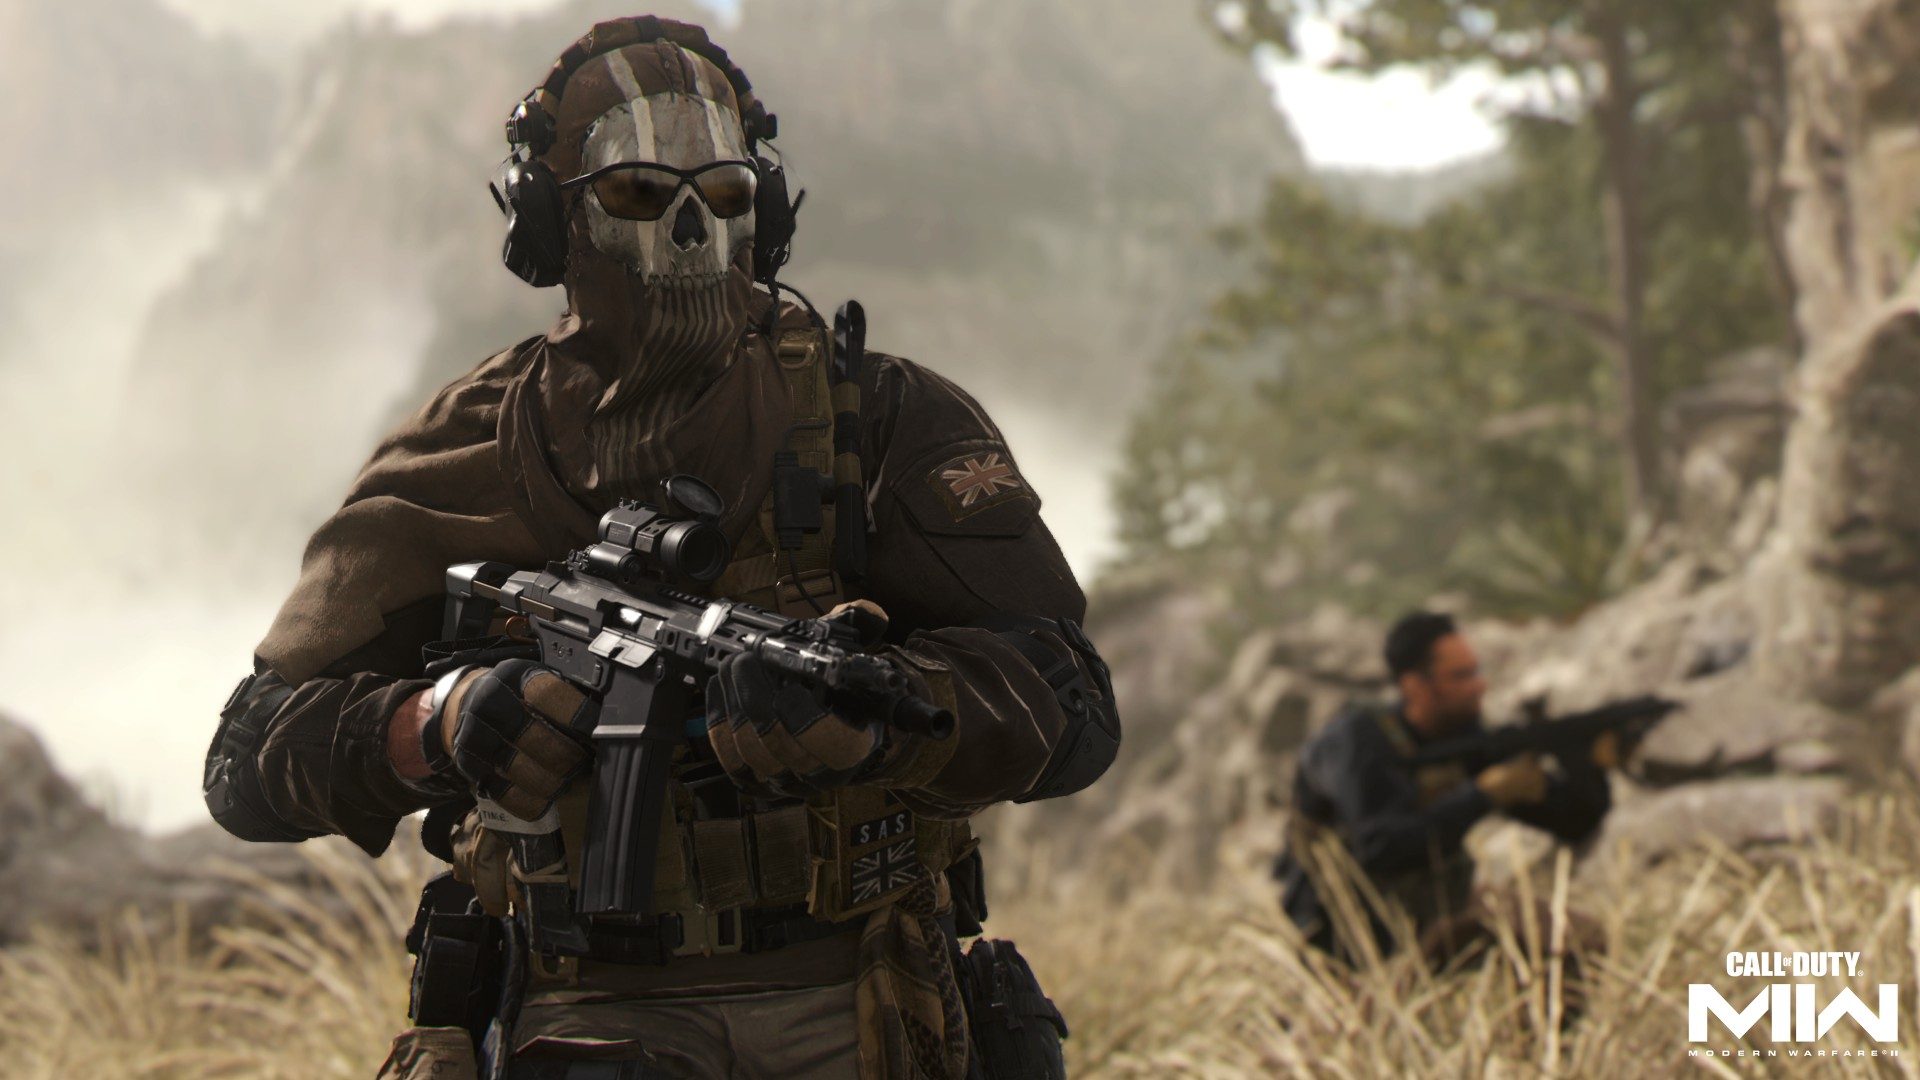 ‘COD: Modern Warfare II’: Campaign details, key features, new multiplayer equipment